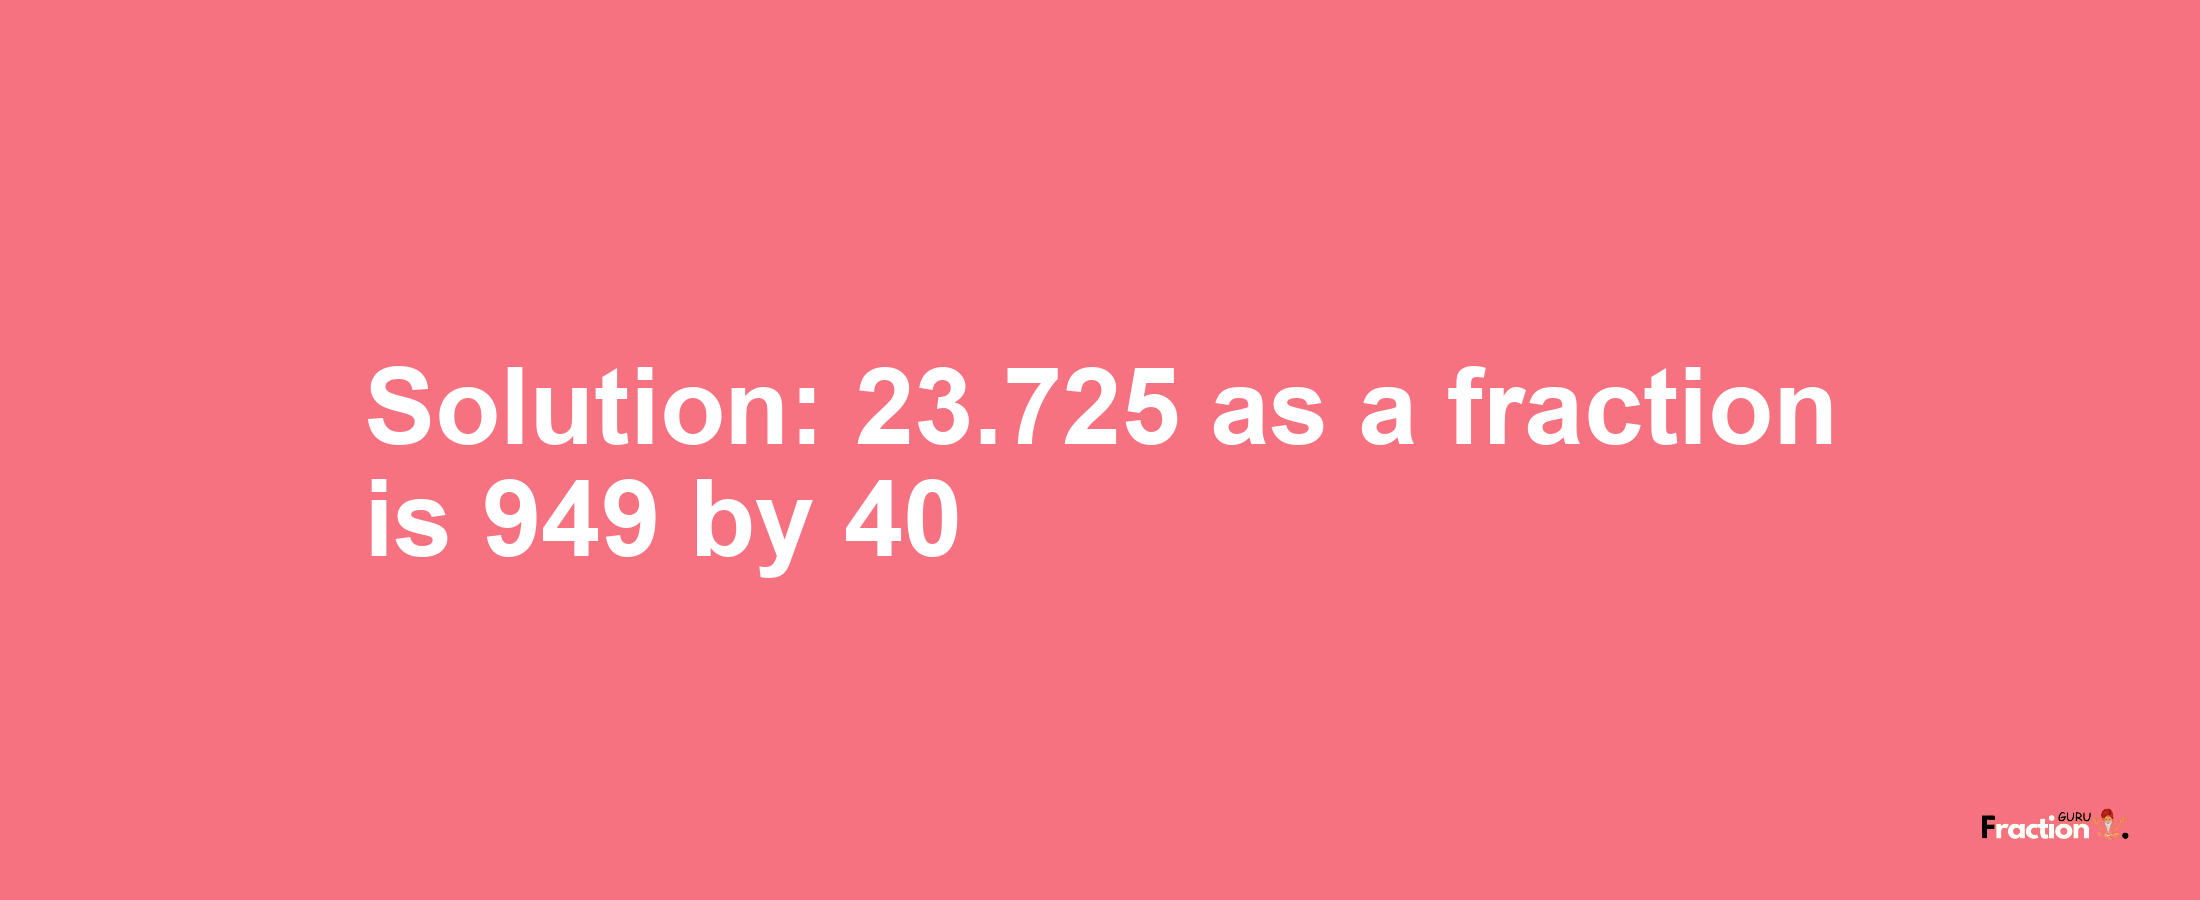 Solution:23.725 as a fraction is 949/40